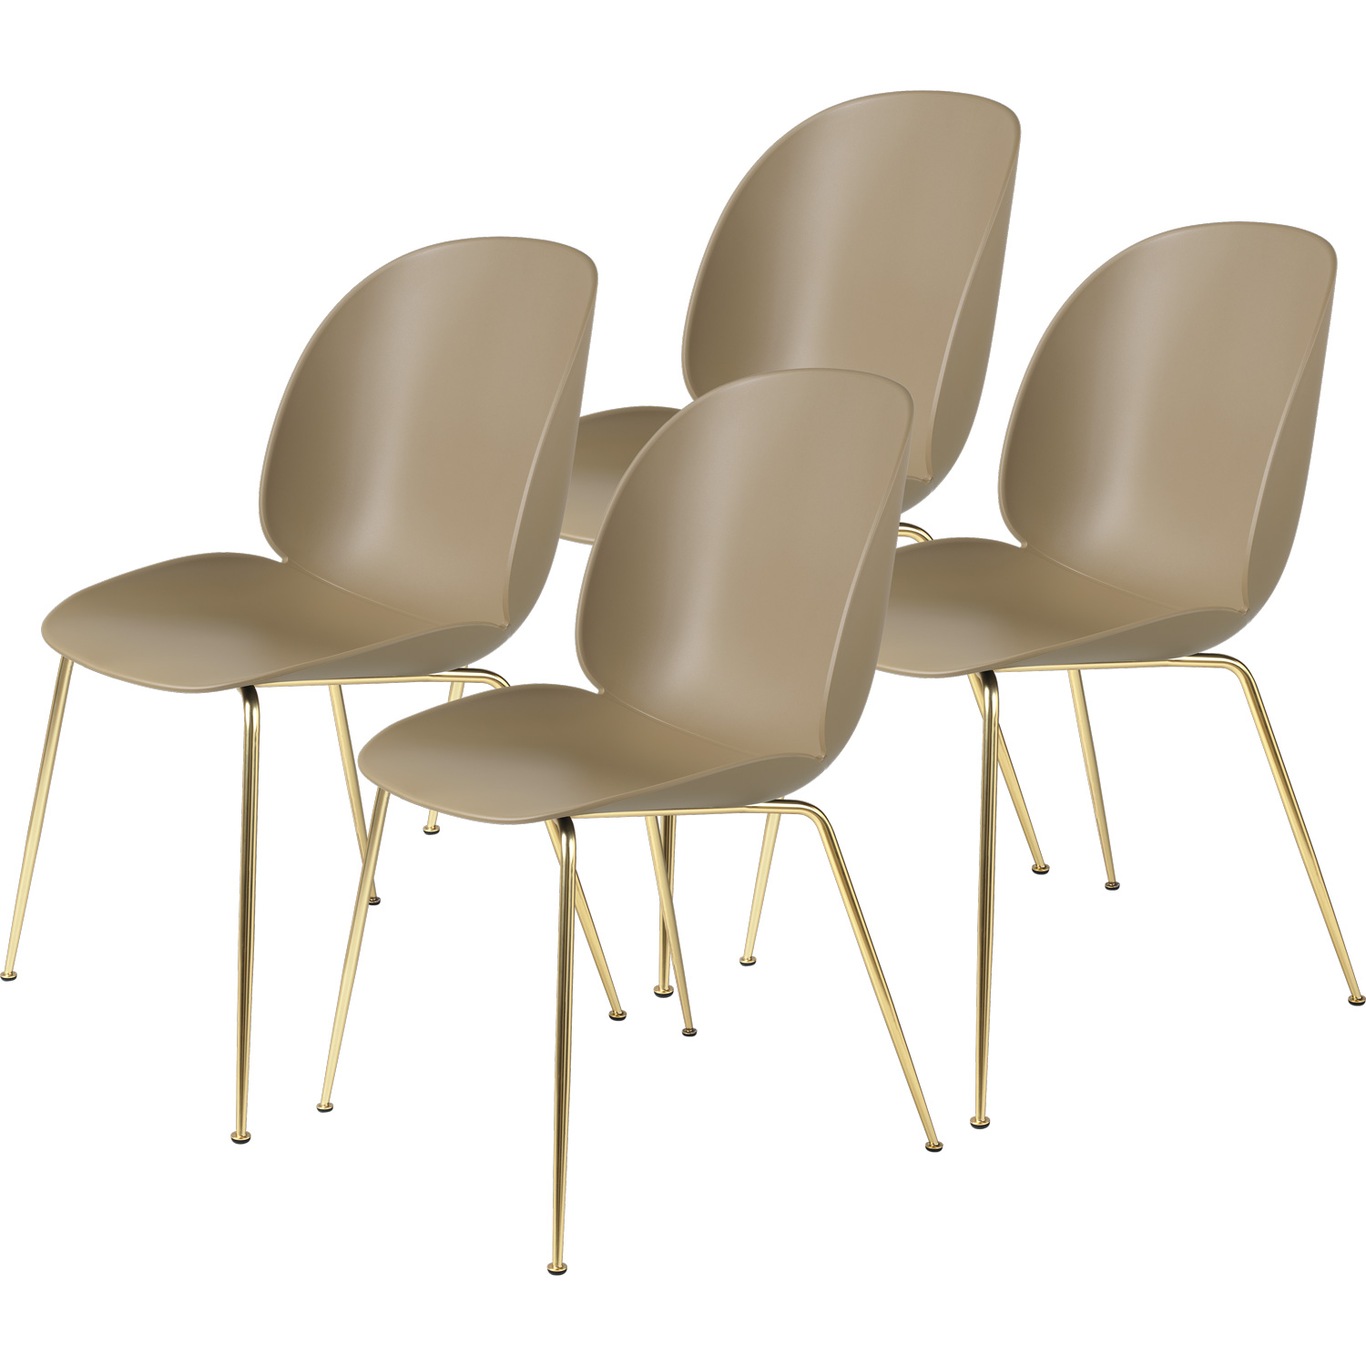 Beetle Chair Un-upholstered 4-pack Conic Base Brass, Pebble